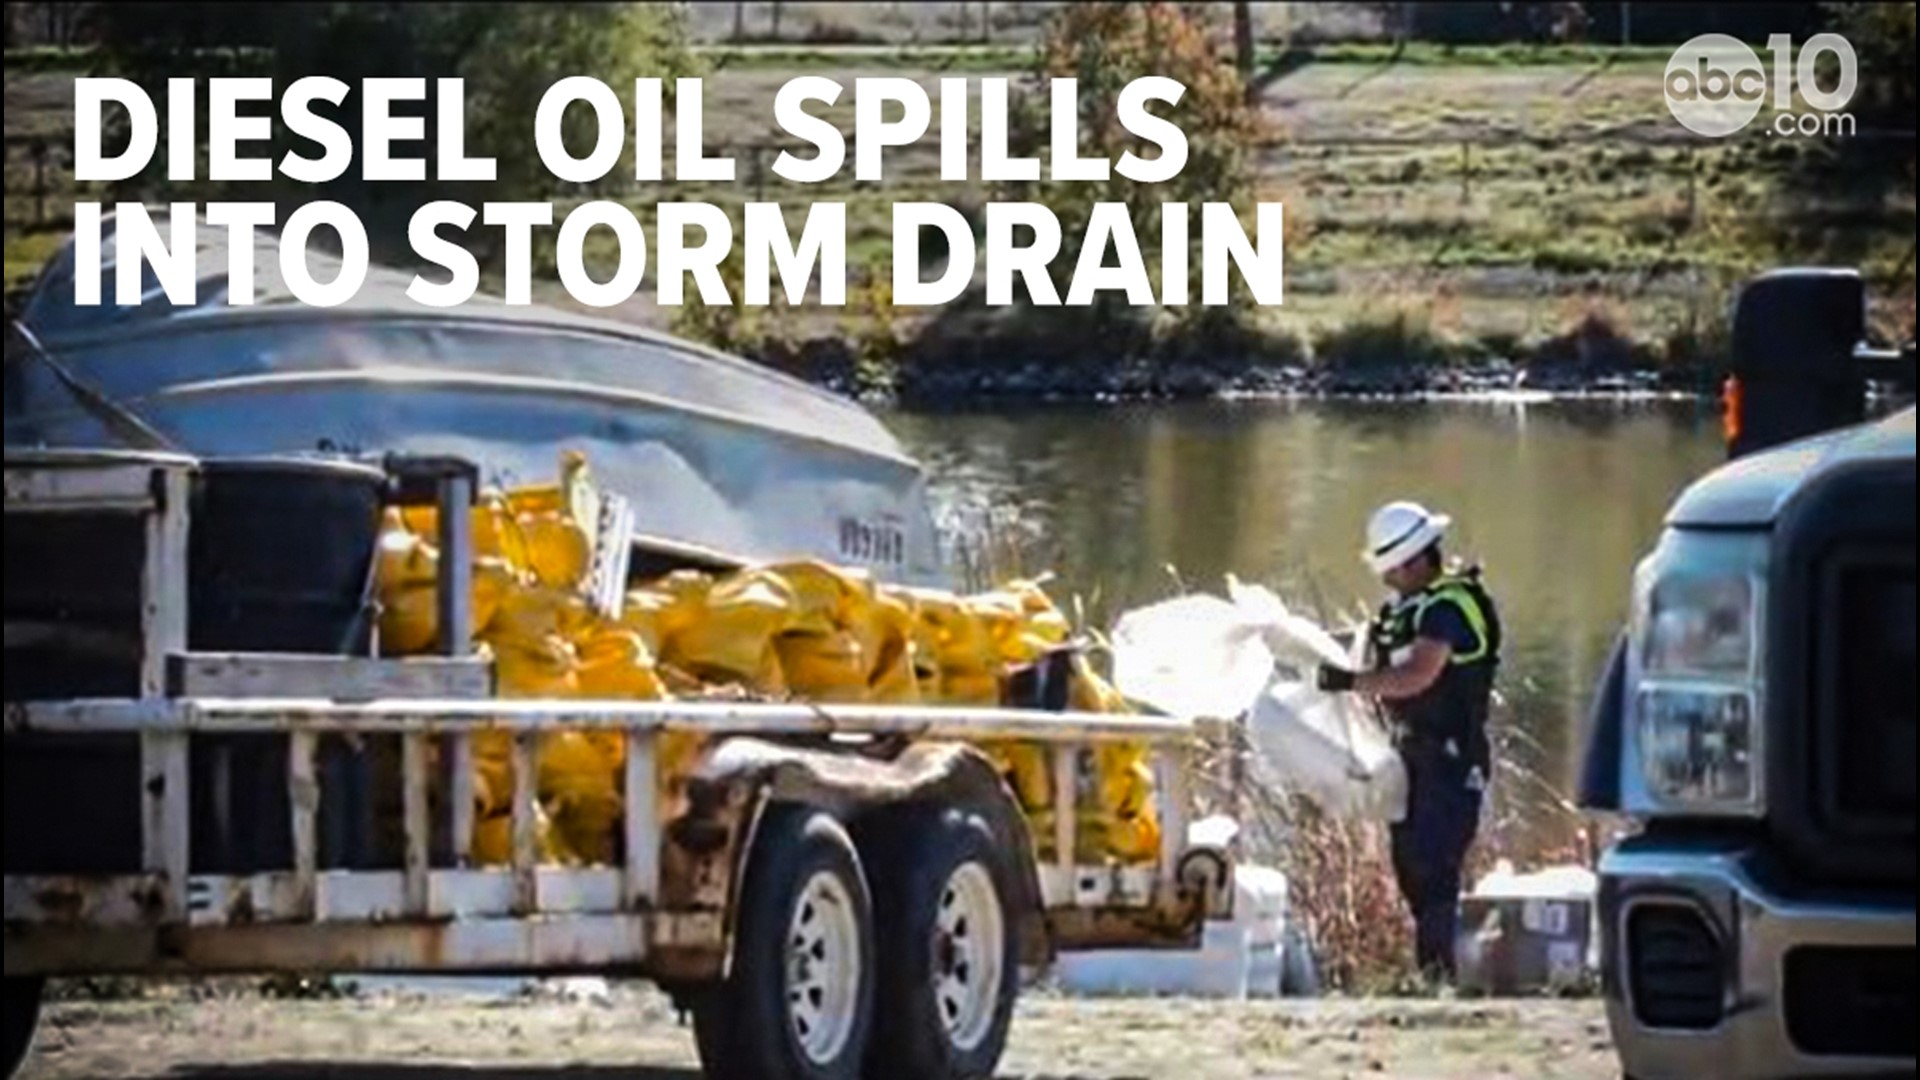 A diesel oil barrel drum at the Heinz company in Natomas spilled, or released, from their company into a storm drain. This impacted two birds.